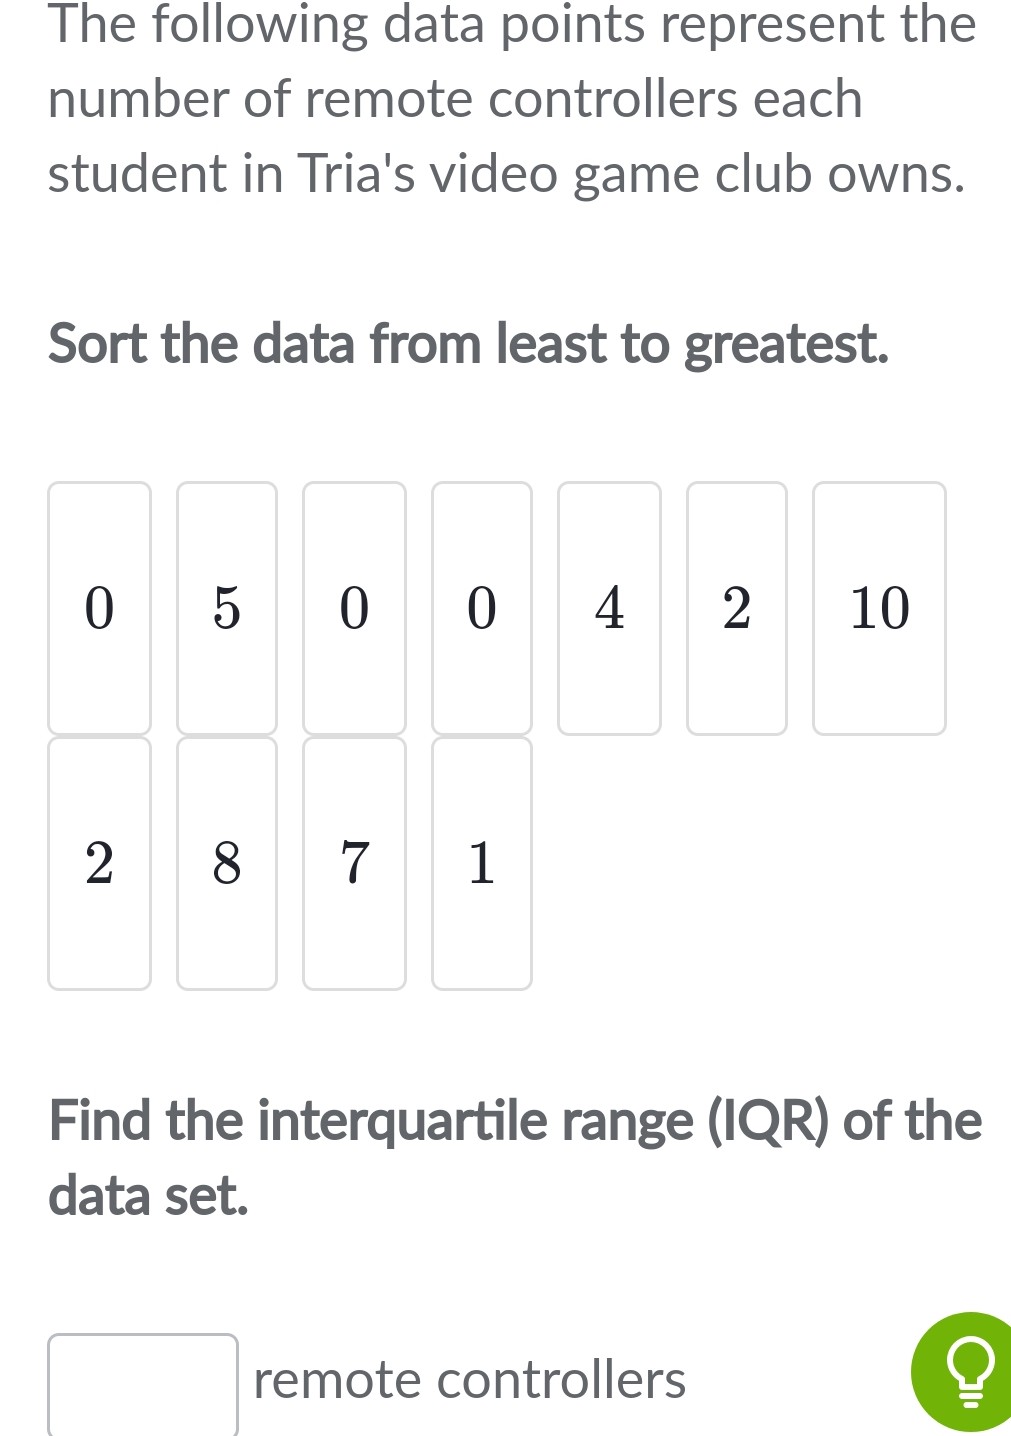 The following data points represent the number of remote controllers each student in Tria's video game club owns.
Sort the data from least to greatest.
Find the interquartile range (IQR) of the data set.
remote controllers